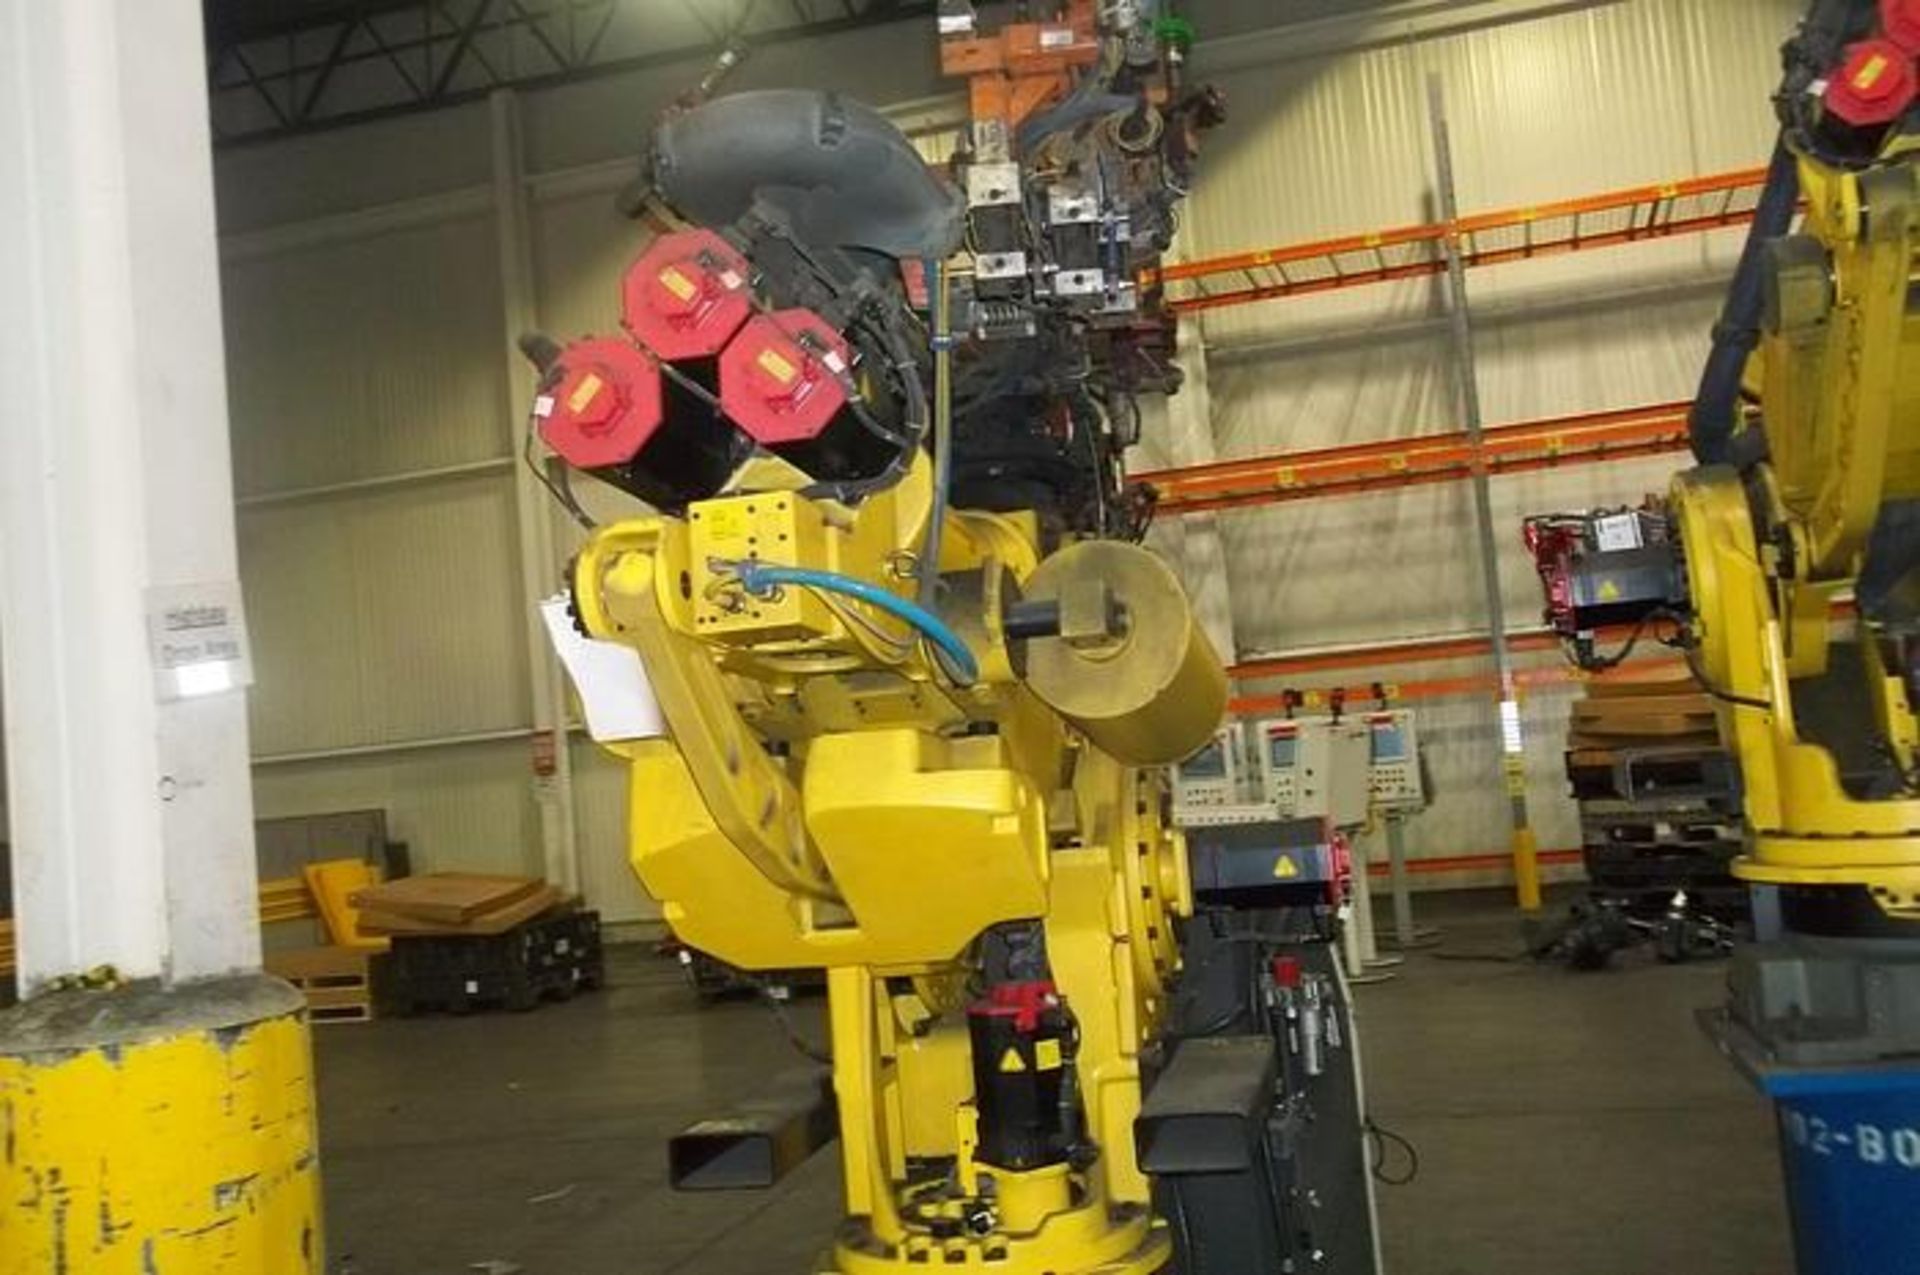 FANUC ROBOT M900iA/600 6 AXIS CNC ROBOTS WITH R30iA CONTROLLER, 600KG X 2,832 MM REACH - Image 12 of 12